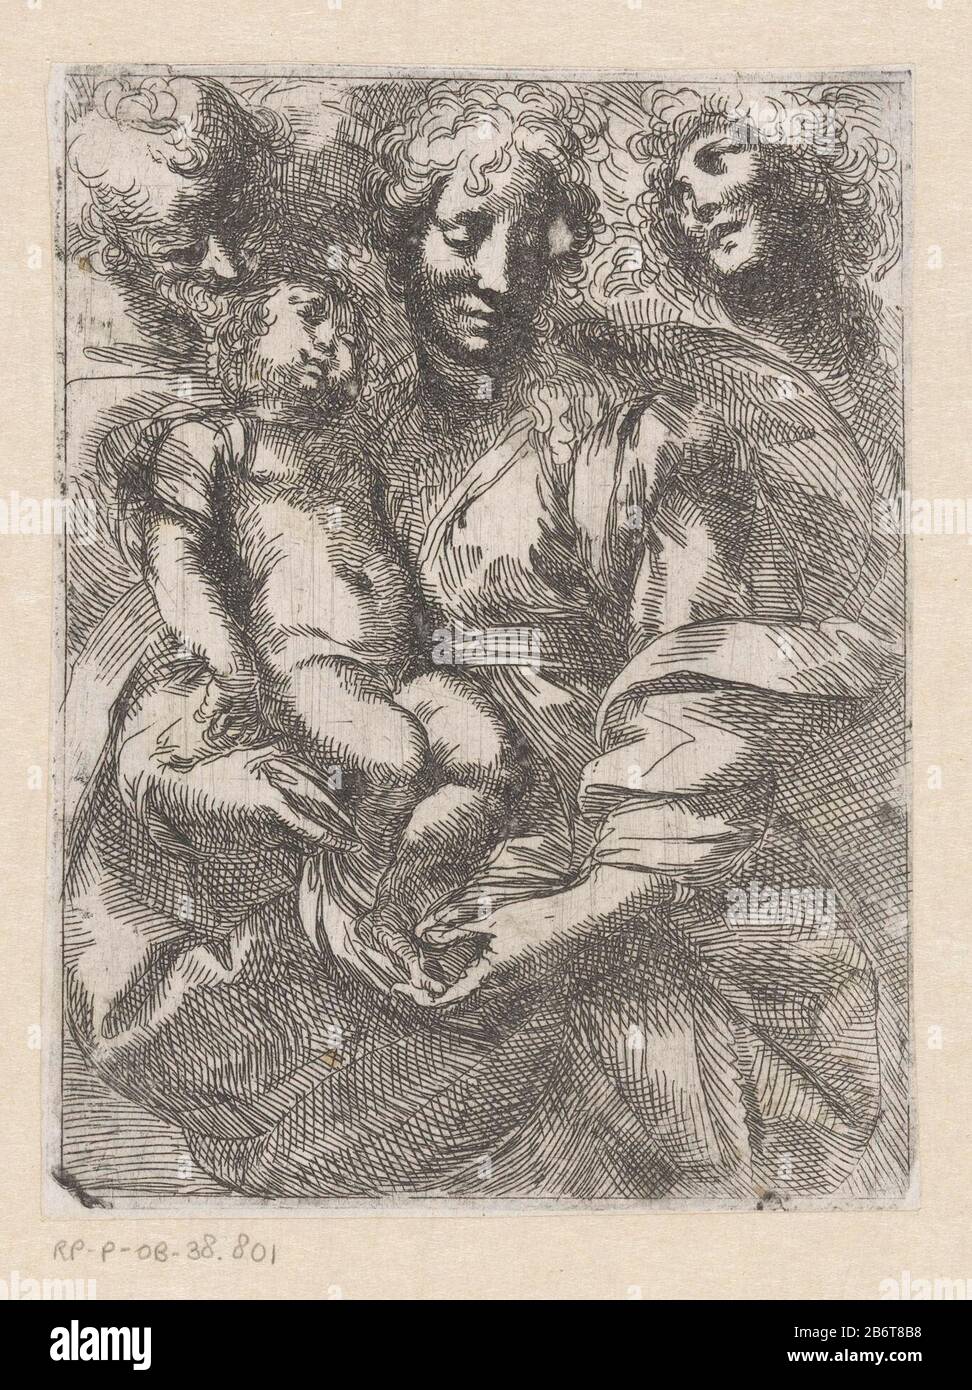 Heilige Familie met een engel Holy Family with an Angel object type: picture Item number: RP-P-OB-38.801Catalogusreferentie: LeBlanc 1Bartsch 2Note: Andrea Camassei. Inscriptions / Brands: collector's mark, verso, stamped: Lugt 240 Manufacturer : printmaker: Giulio Cesare ProcacciniPlaats manufacture: Italy Date: 1584 - 1625 Physical features: etching material: paper Technique: etching dimensions: sheet: h 167 mm (Inner cut plate edge.) × W 26 mm (Inner cut plate edge.)  Subject: Holy Family, and derived representation angels Stock Photo